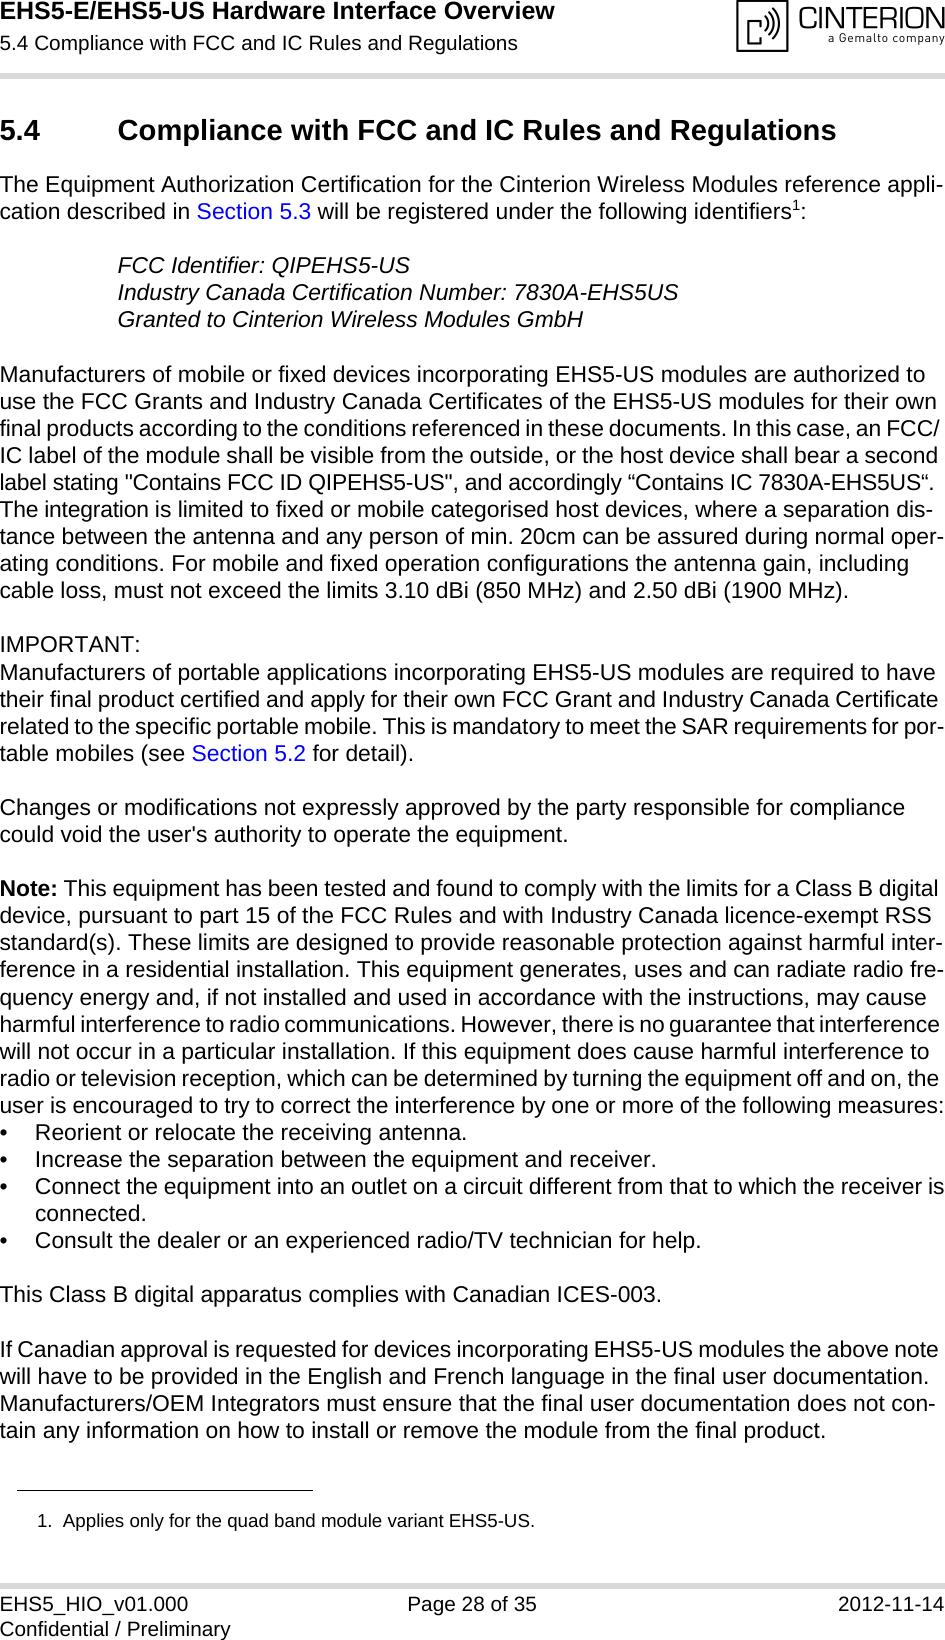 EHS5-E/EHS5-US Hardware Interface Overview5.4 Compliance with FCC and IC Rules and Regulations28EHS5_HIO_v01.000 Page 28 of 35 2012-11-14Confidential / Preliminary5.4 Compliance with FCC and IC Rules and RegulationsThe Equipment Authorization Certification for the Cinterion Wireless Modules reference appli-cation described in Section 5.3 will be registered under the following identifiers1:FCC Identifier: QIPEHS5-USIndustry Canada Certification Number: 7830A-EHS5USGranted to Cinterion Wireless Modules GmbH Manufacturers of mobile or fixed devices incorporating EHS5-US modules are authorized to use the FCC Grants and Industry Canada Certificates of the EHS5-US modules for their own final products according to the conditions referenced in these documents. In this case, an FCC/ IC label of the module shall be visible from the outside, or the host device shall bear a second label stating &quot;Contains FCC ID QIPEHS5-US&quot;, and accordingly “Contains IC 7830A-EHS5US“. The integration is limited to fixed or mobile categorised host devices, where a separation dis-tance between the antenna and any person of min. 20cm can be assured during normal oper-ating conditions. For mobile and fixed operation configurations the antenna gain, including cable loss, must not exceed the limits 3.10 dBi (850 MHz) and 2.50 dBi (1900 MHz).IMPORTANT: Manufacturers of portable applications incorporating EHS5-US modules are required to have their final product certified and apply for their own FCC Grant and Industry Canada Certificate related to the specific portable mobile. This is mandatory to meet the SAR requirements for por-table mobiles (see Section 5.2 for detail).Changes or modifications not expressly approved by the party responsible for compliance could void the user&apos;s authority to operate the equipment.Note: This equipment has been tested and found to comply with the limits for a Class B digital device, pursuant to part 15 of the FCC Rules and with Industry Canada licence-exempt RSS standard(s). These limits are designed to provide reasonable protection against harmful inter-ference in a residential installation. This equipment generates, uses and can radiate radio fre-quency energy and, if not installed and used in accordance with the instructions, may cause harmful interference to radio communications. However, there is no guarantee that interference will not occur in a particular installation. If this equipment does cause harmful interference to radio or television reception, which can be determined by turning the equipment off and on, the user is encouraged to try to correct the interference by one or more of the following measures:• Reorient or relocate the receiving antenna.• Increase the separation between the equipment and receiver.• Connect the equipment into an outlet on a circuit different from that to which the receiver isconnected.• Consult the dealer or an experienced radio/TV technician for help.This Class B digital apparatus complies with Canadian ICES-003.If Canadian approval is requested for devices incorporating EHS5-US modules the above note will have to be provided in the English and French language in the final user documentation. Manufacturers/OEM Integrators must ensure that the final user documentation does not con-tain any information on how to install or remove the module from the final product.1.  Applies only for the quad band module variant EHS5-US.